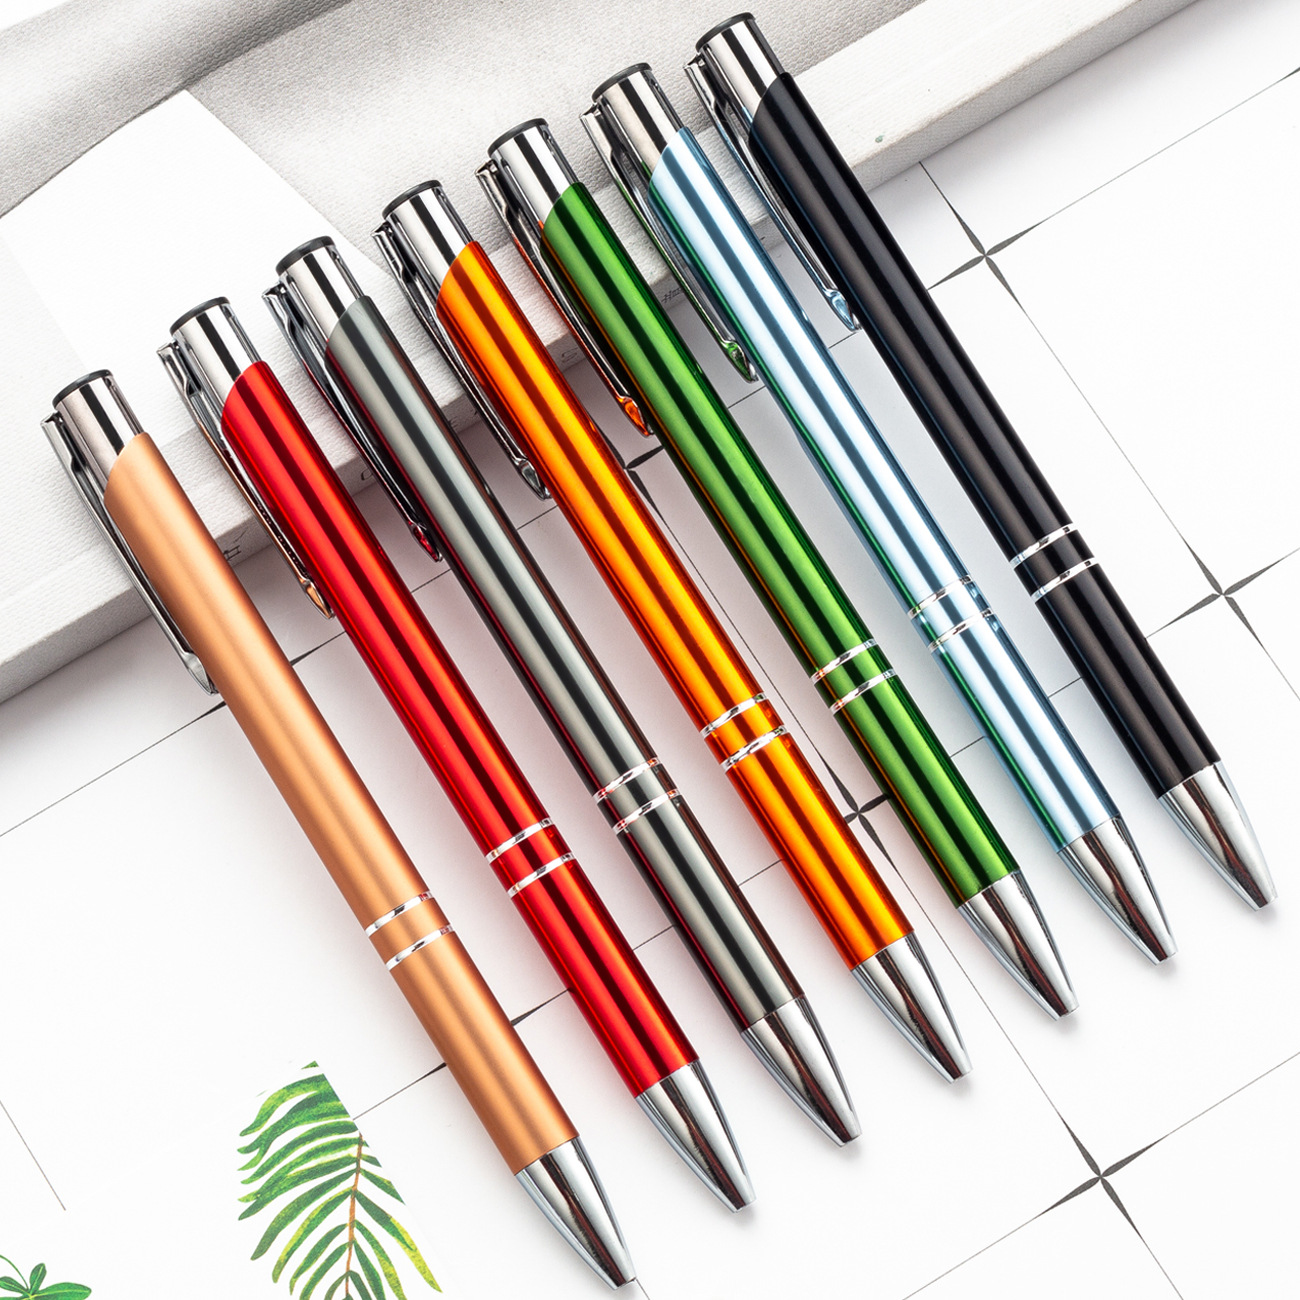 Metal Housing Ball Point Pences Office School Stationery Driveble Ball Point Pen